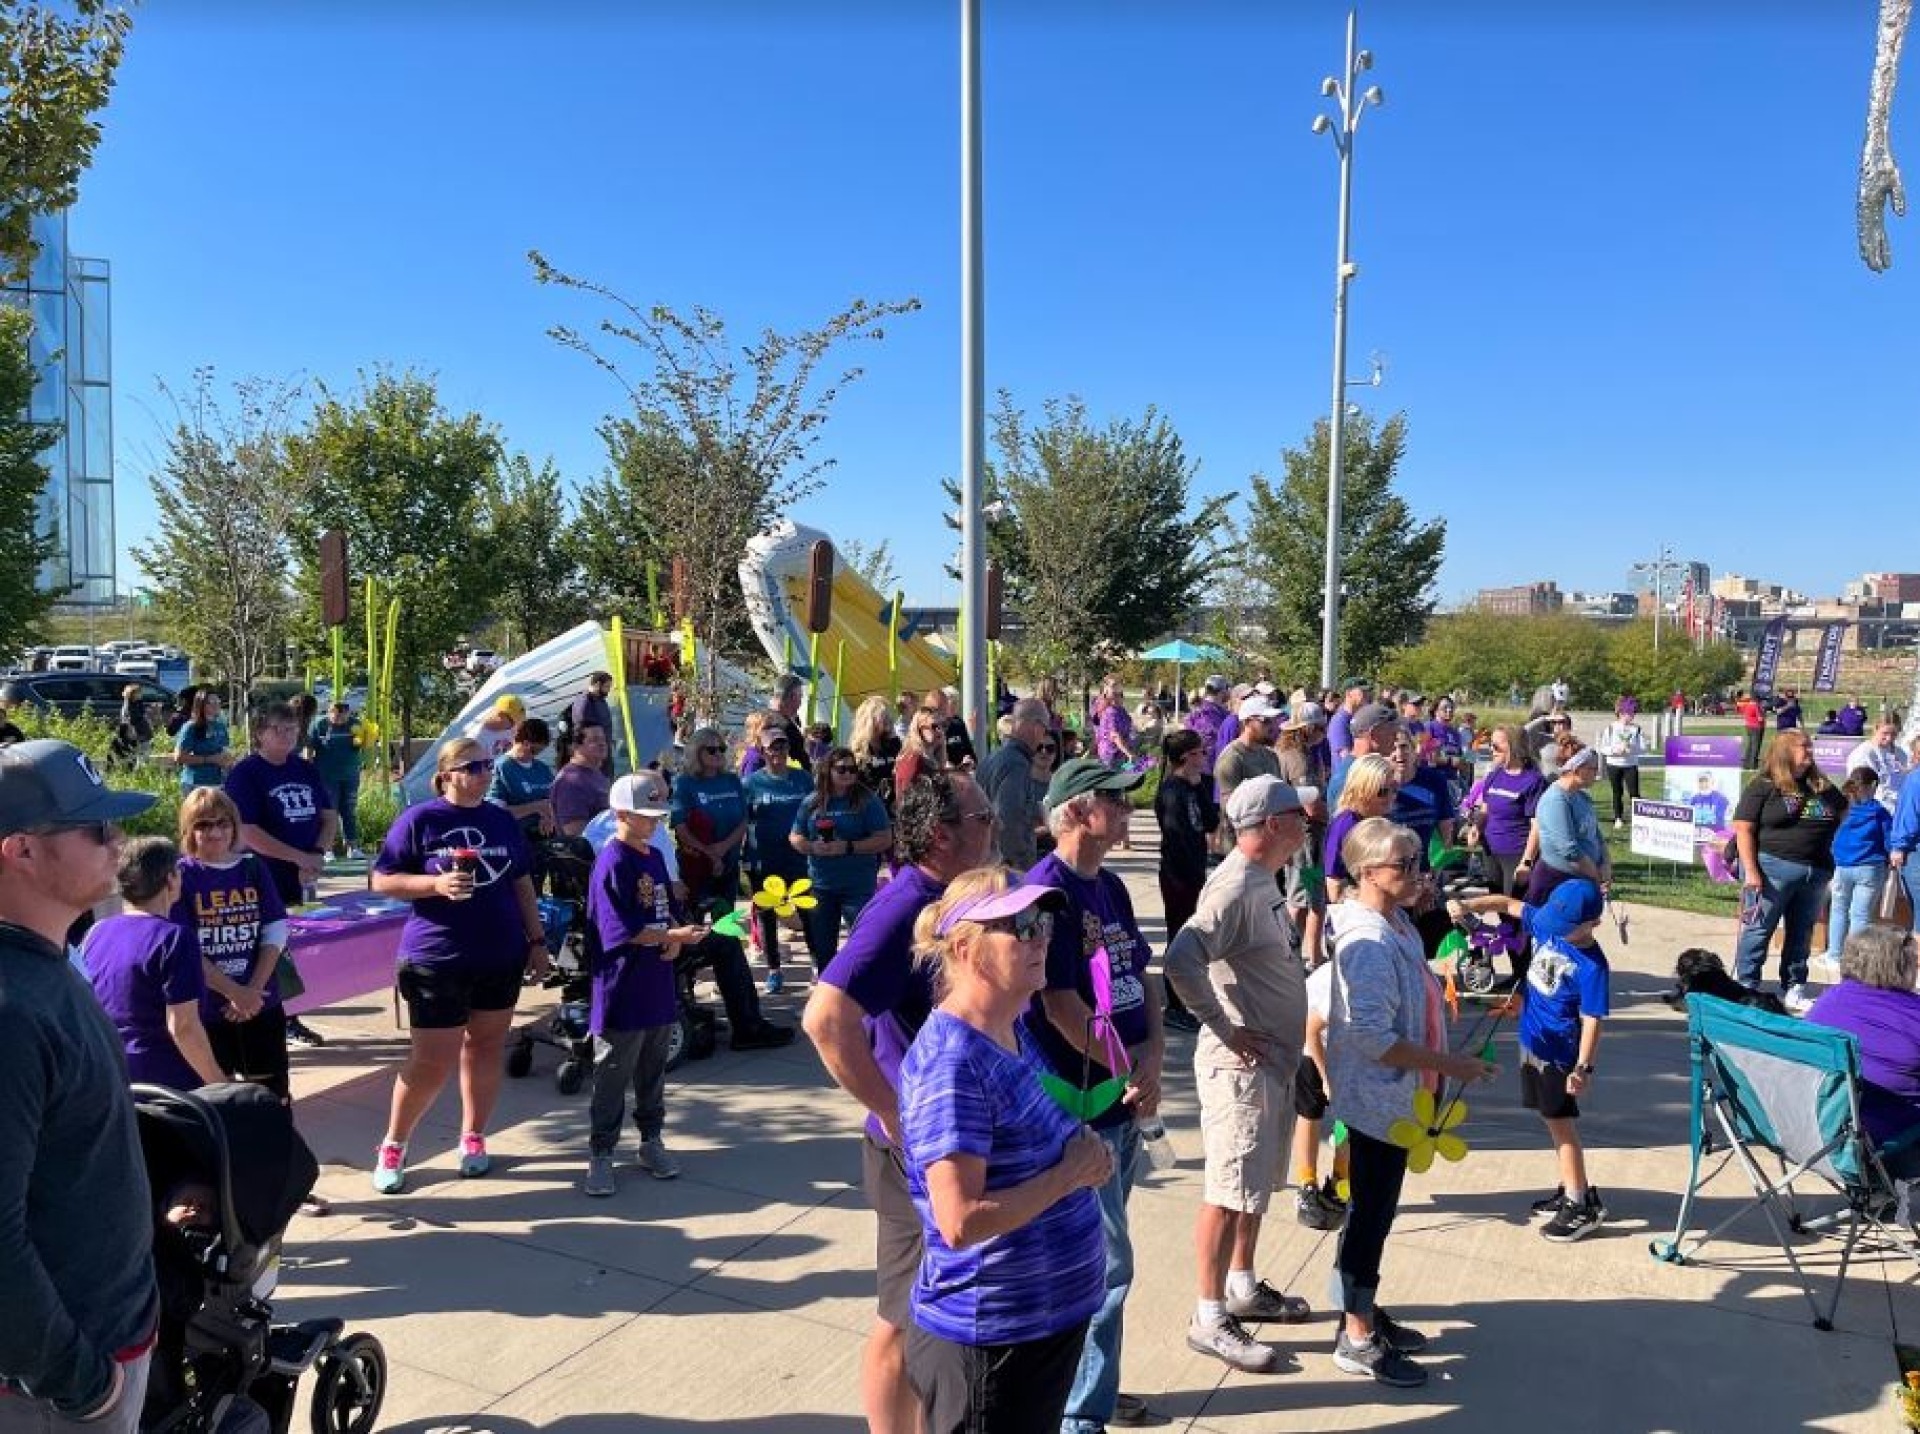 Participants in the Walk to End Alzheimer's in Council Bluffs, Iowa